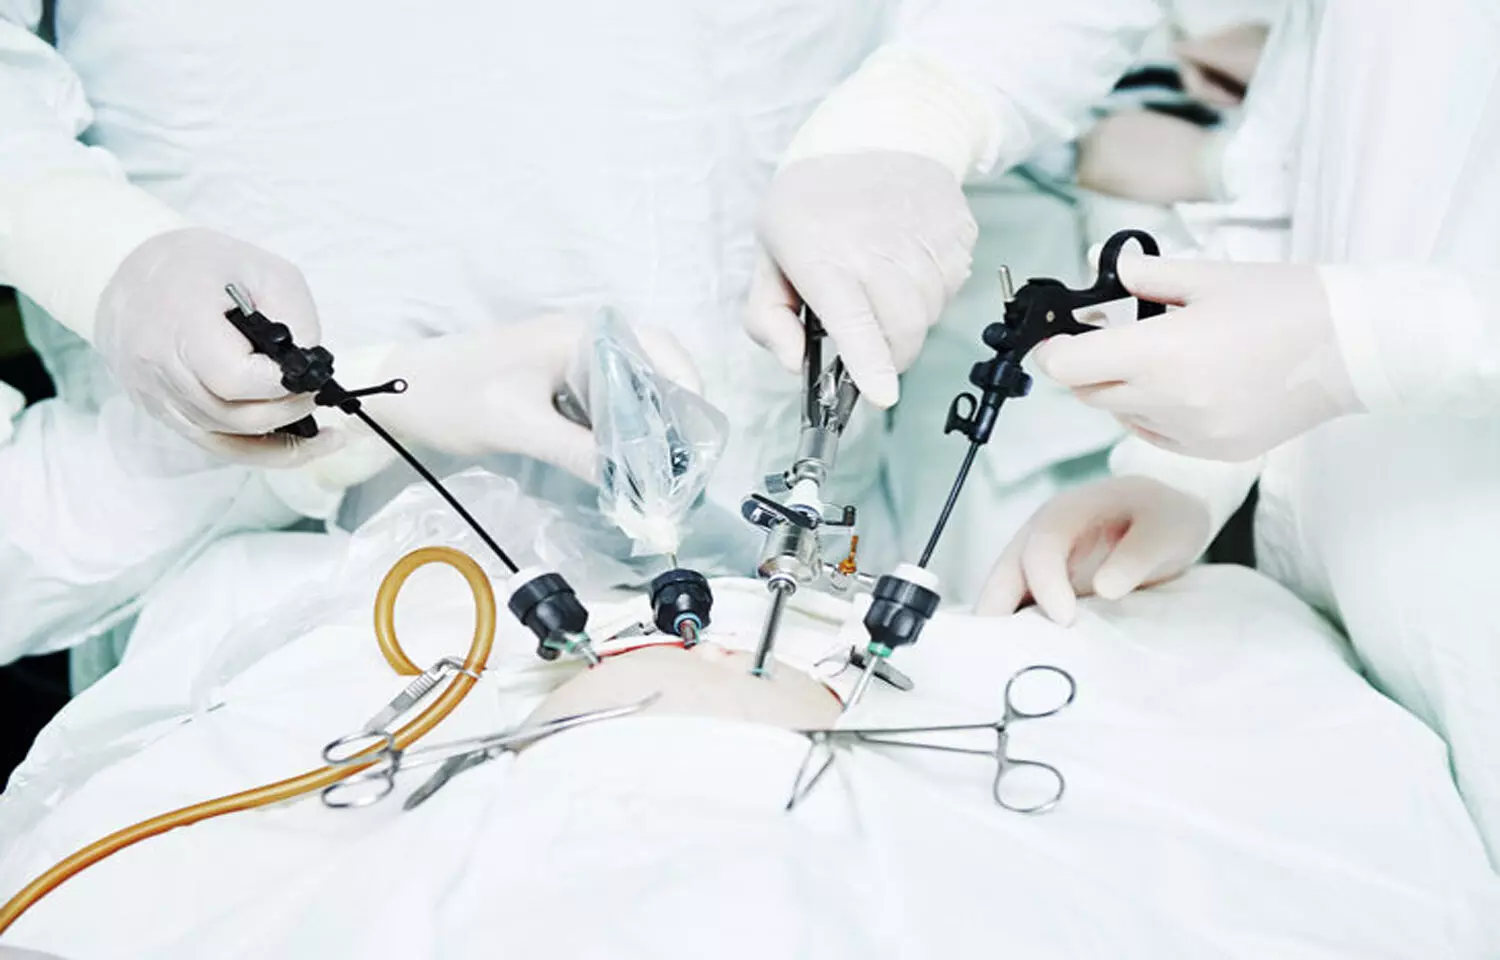 Laparoscopic surgery of inguinal hernia fails to outperform open repair under local anesthesia